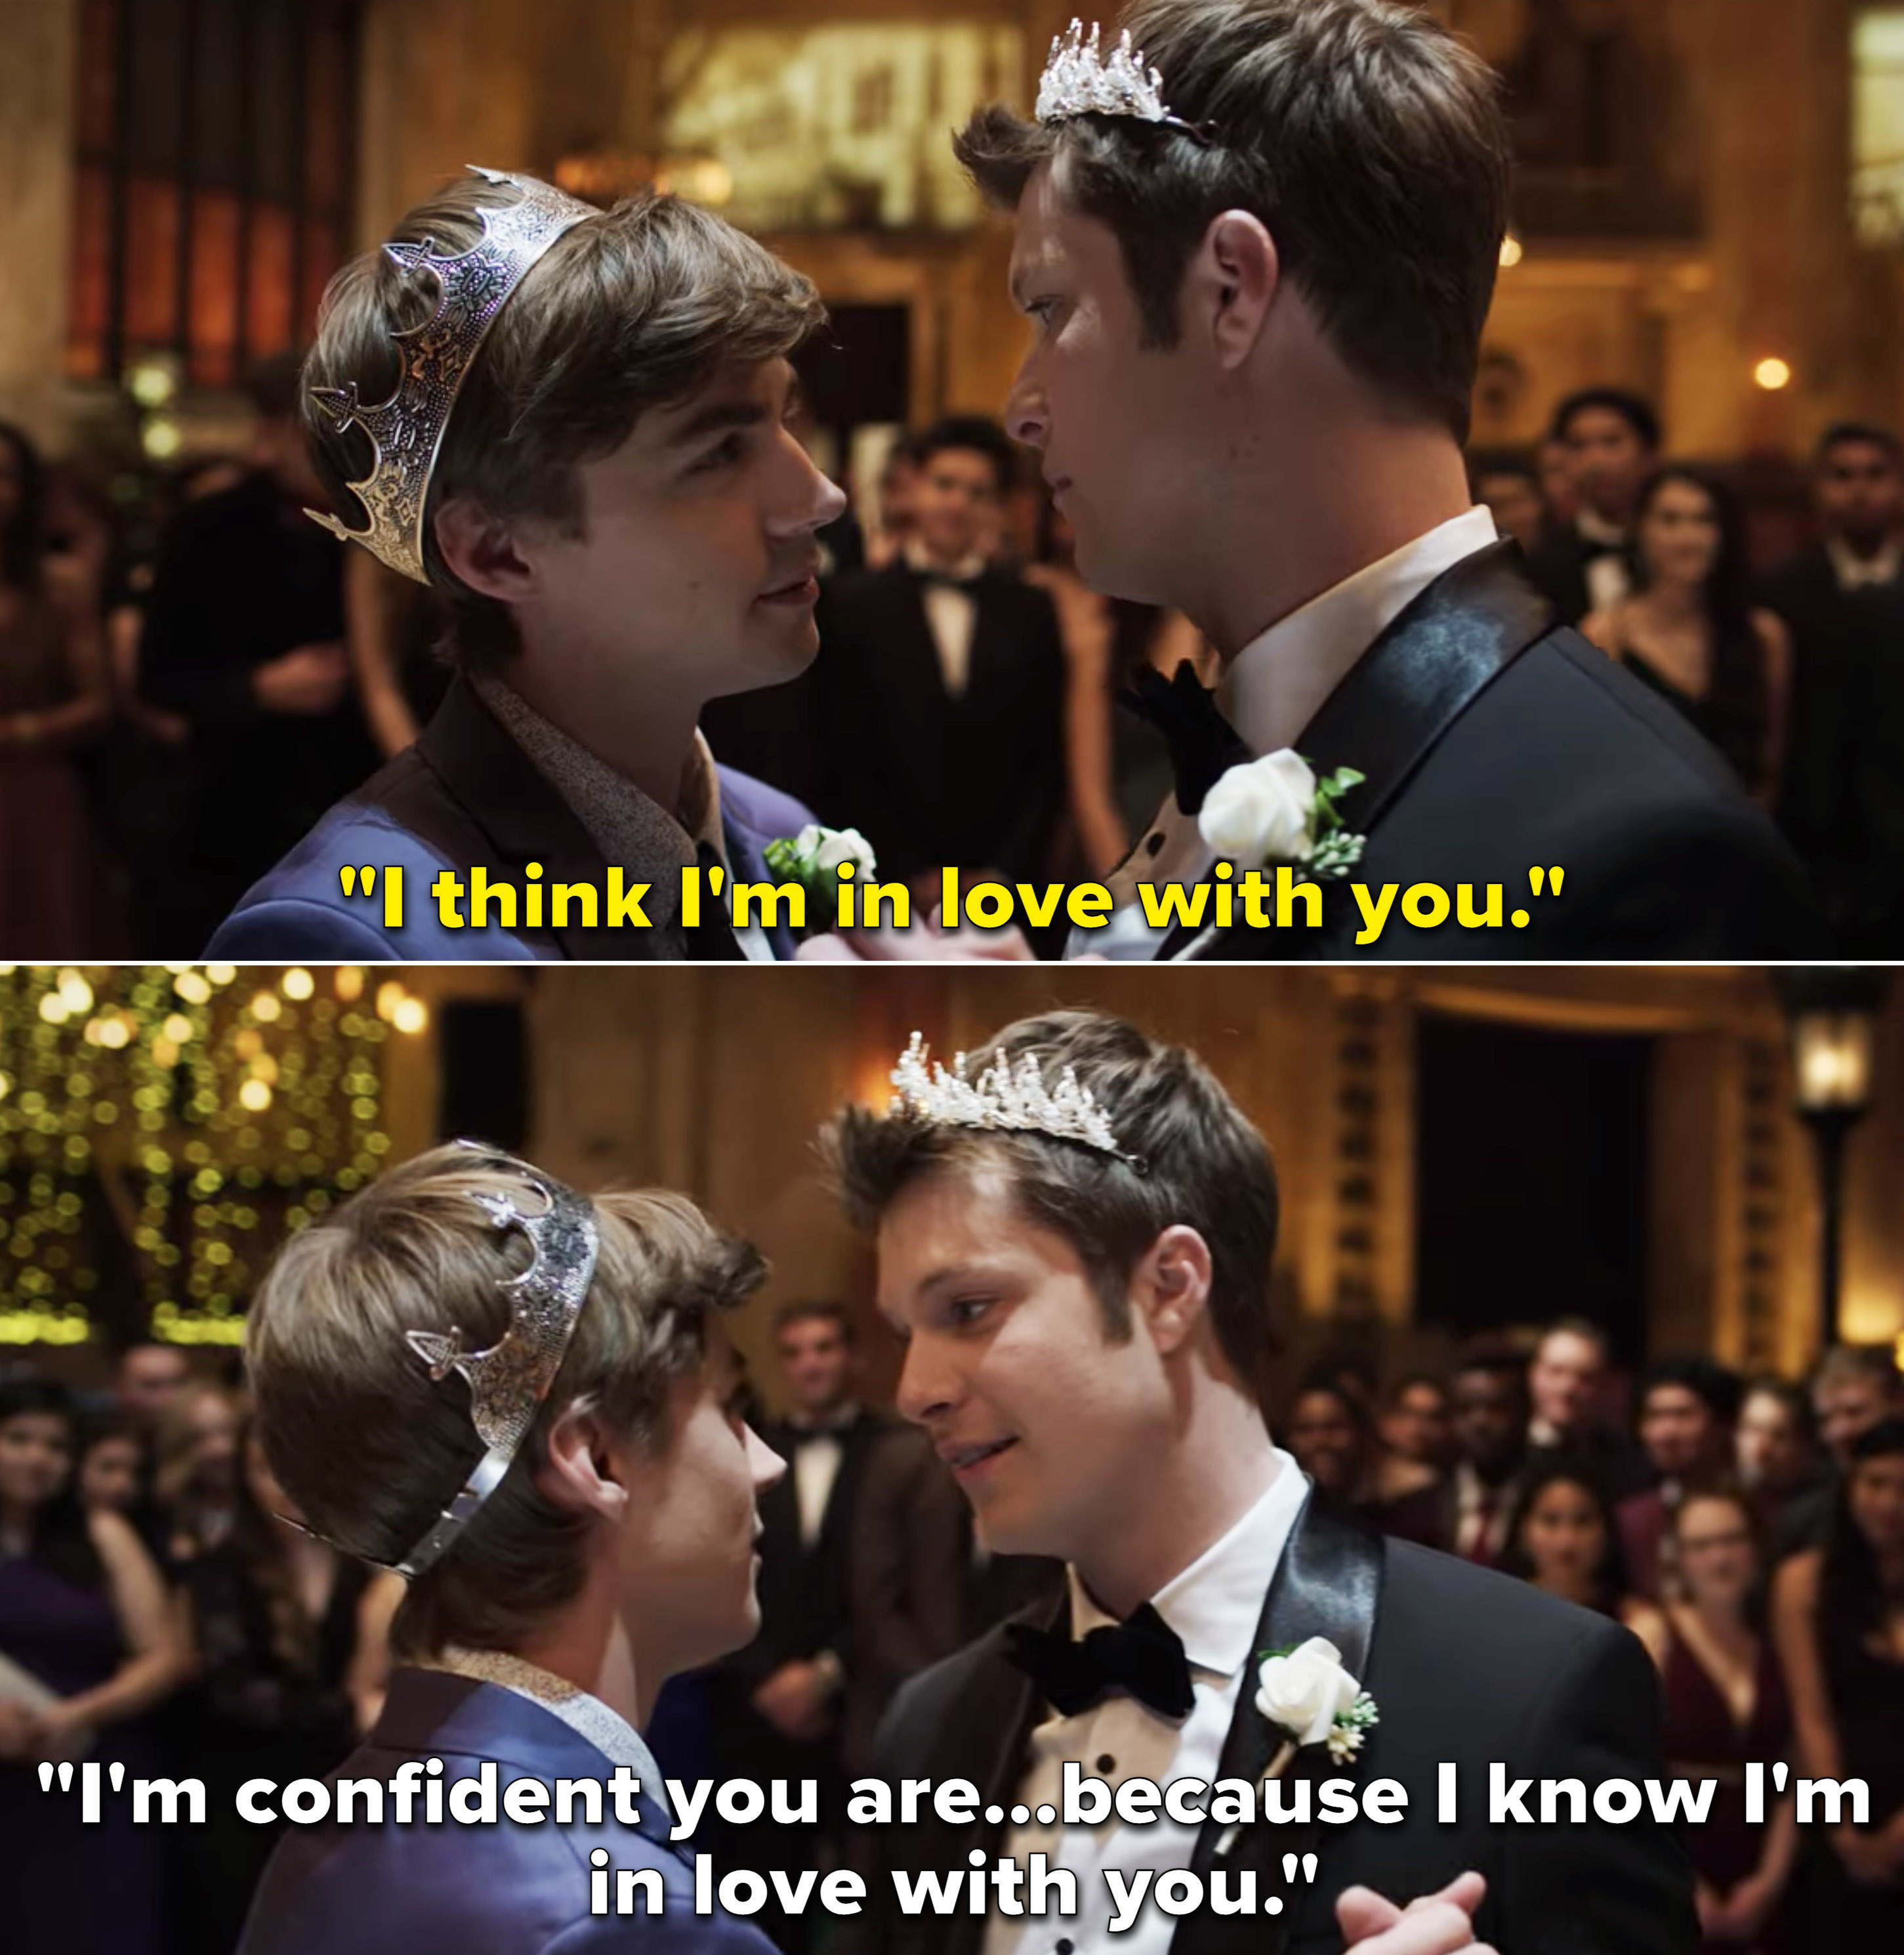 Alex: "I think I'm in love with you," Charlie: "I'm confident you are, because I know I'm in love with you"